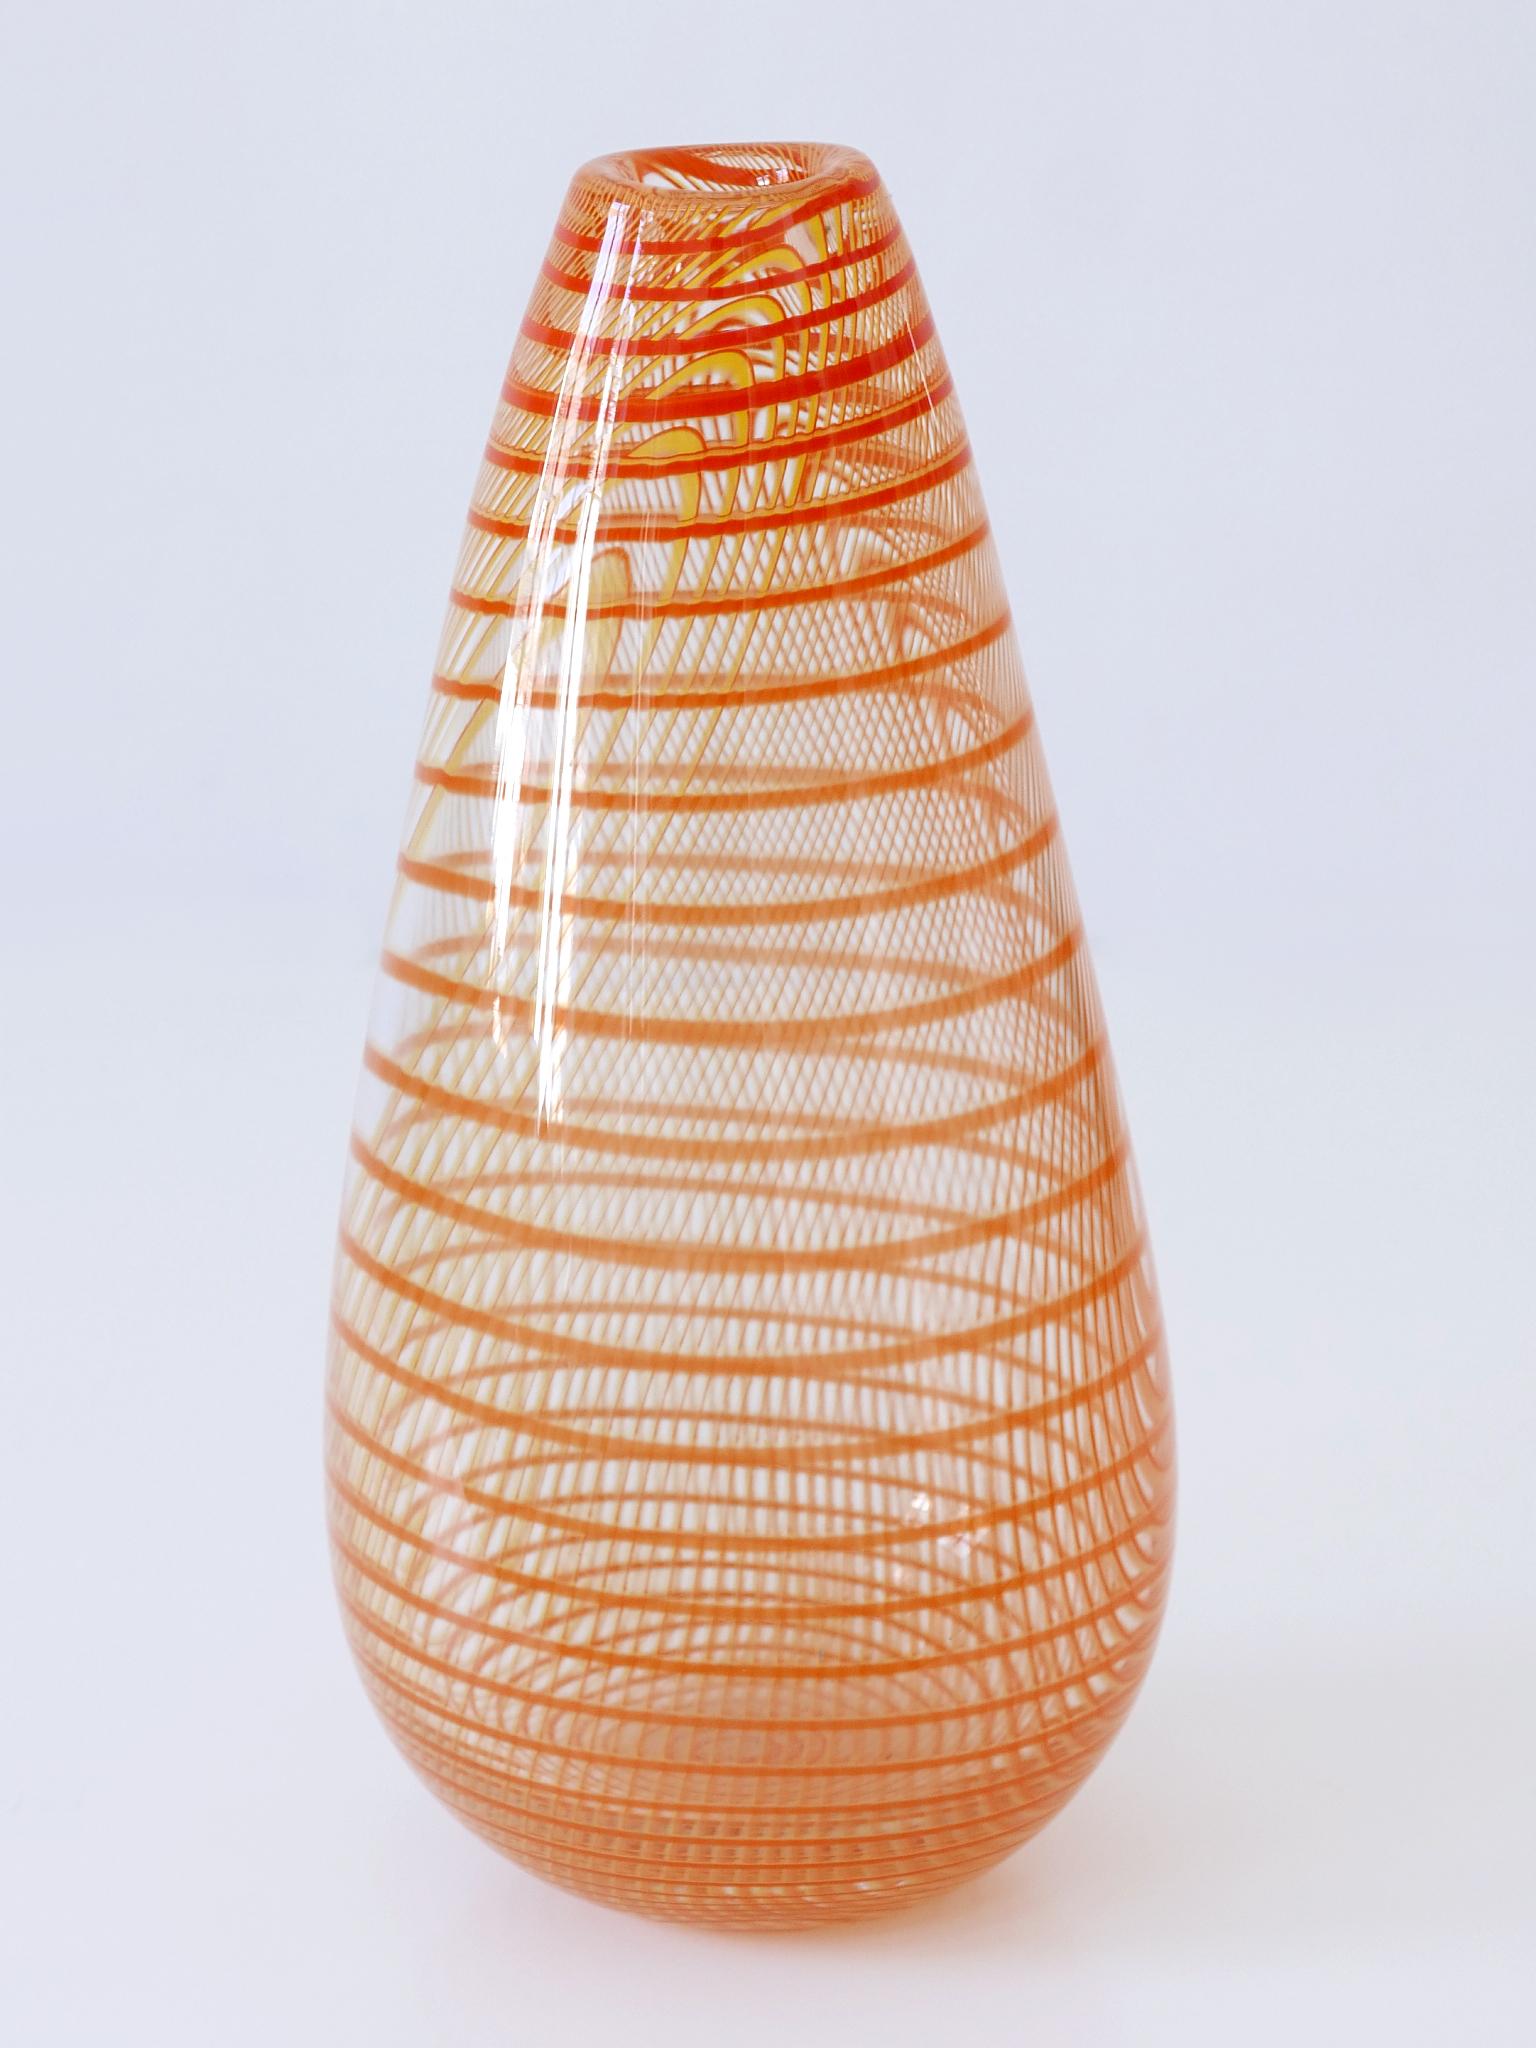 Signed & Limited Edition Art Glass Vase by Olle Brozén for Kosta Boda Sweden For Sale 4